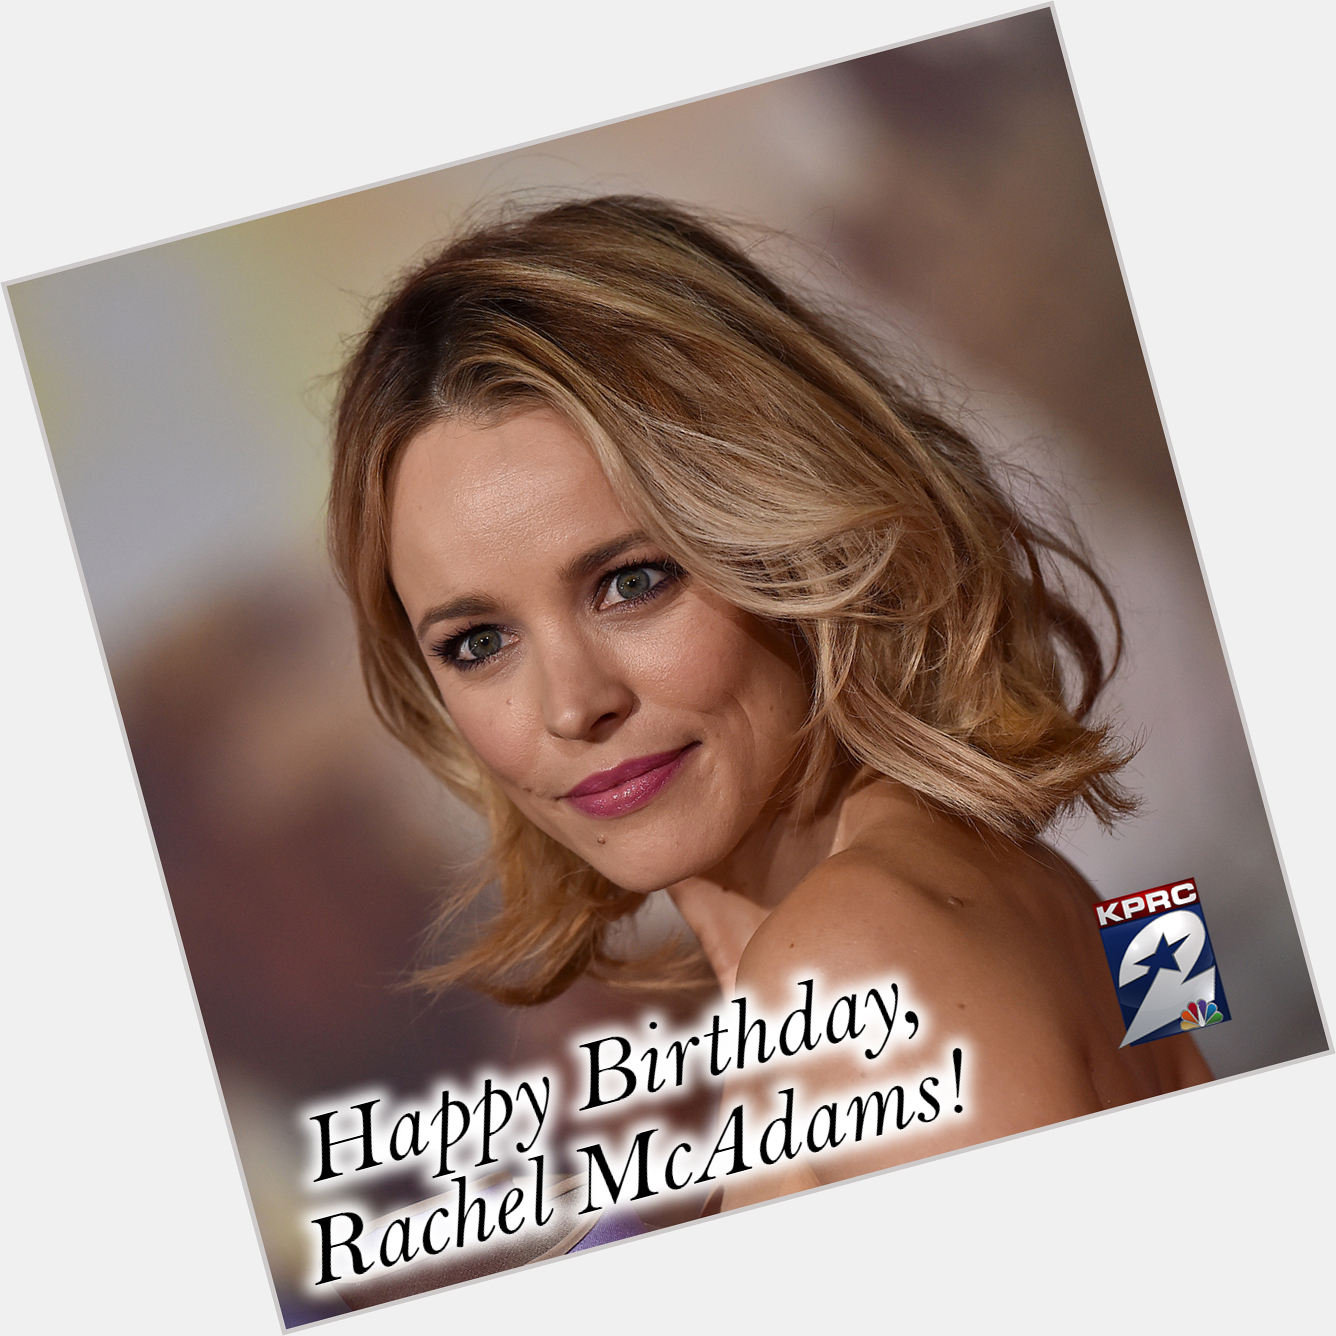 Happy Birthday, Rachel McAdams! The actress is 42 years old today. Join us in wishing her a beautiful day. 